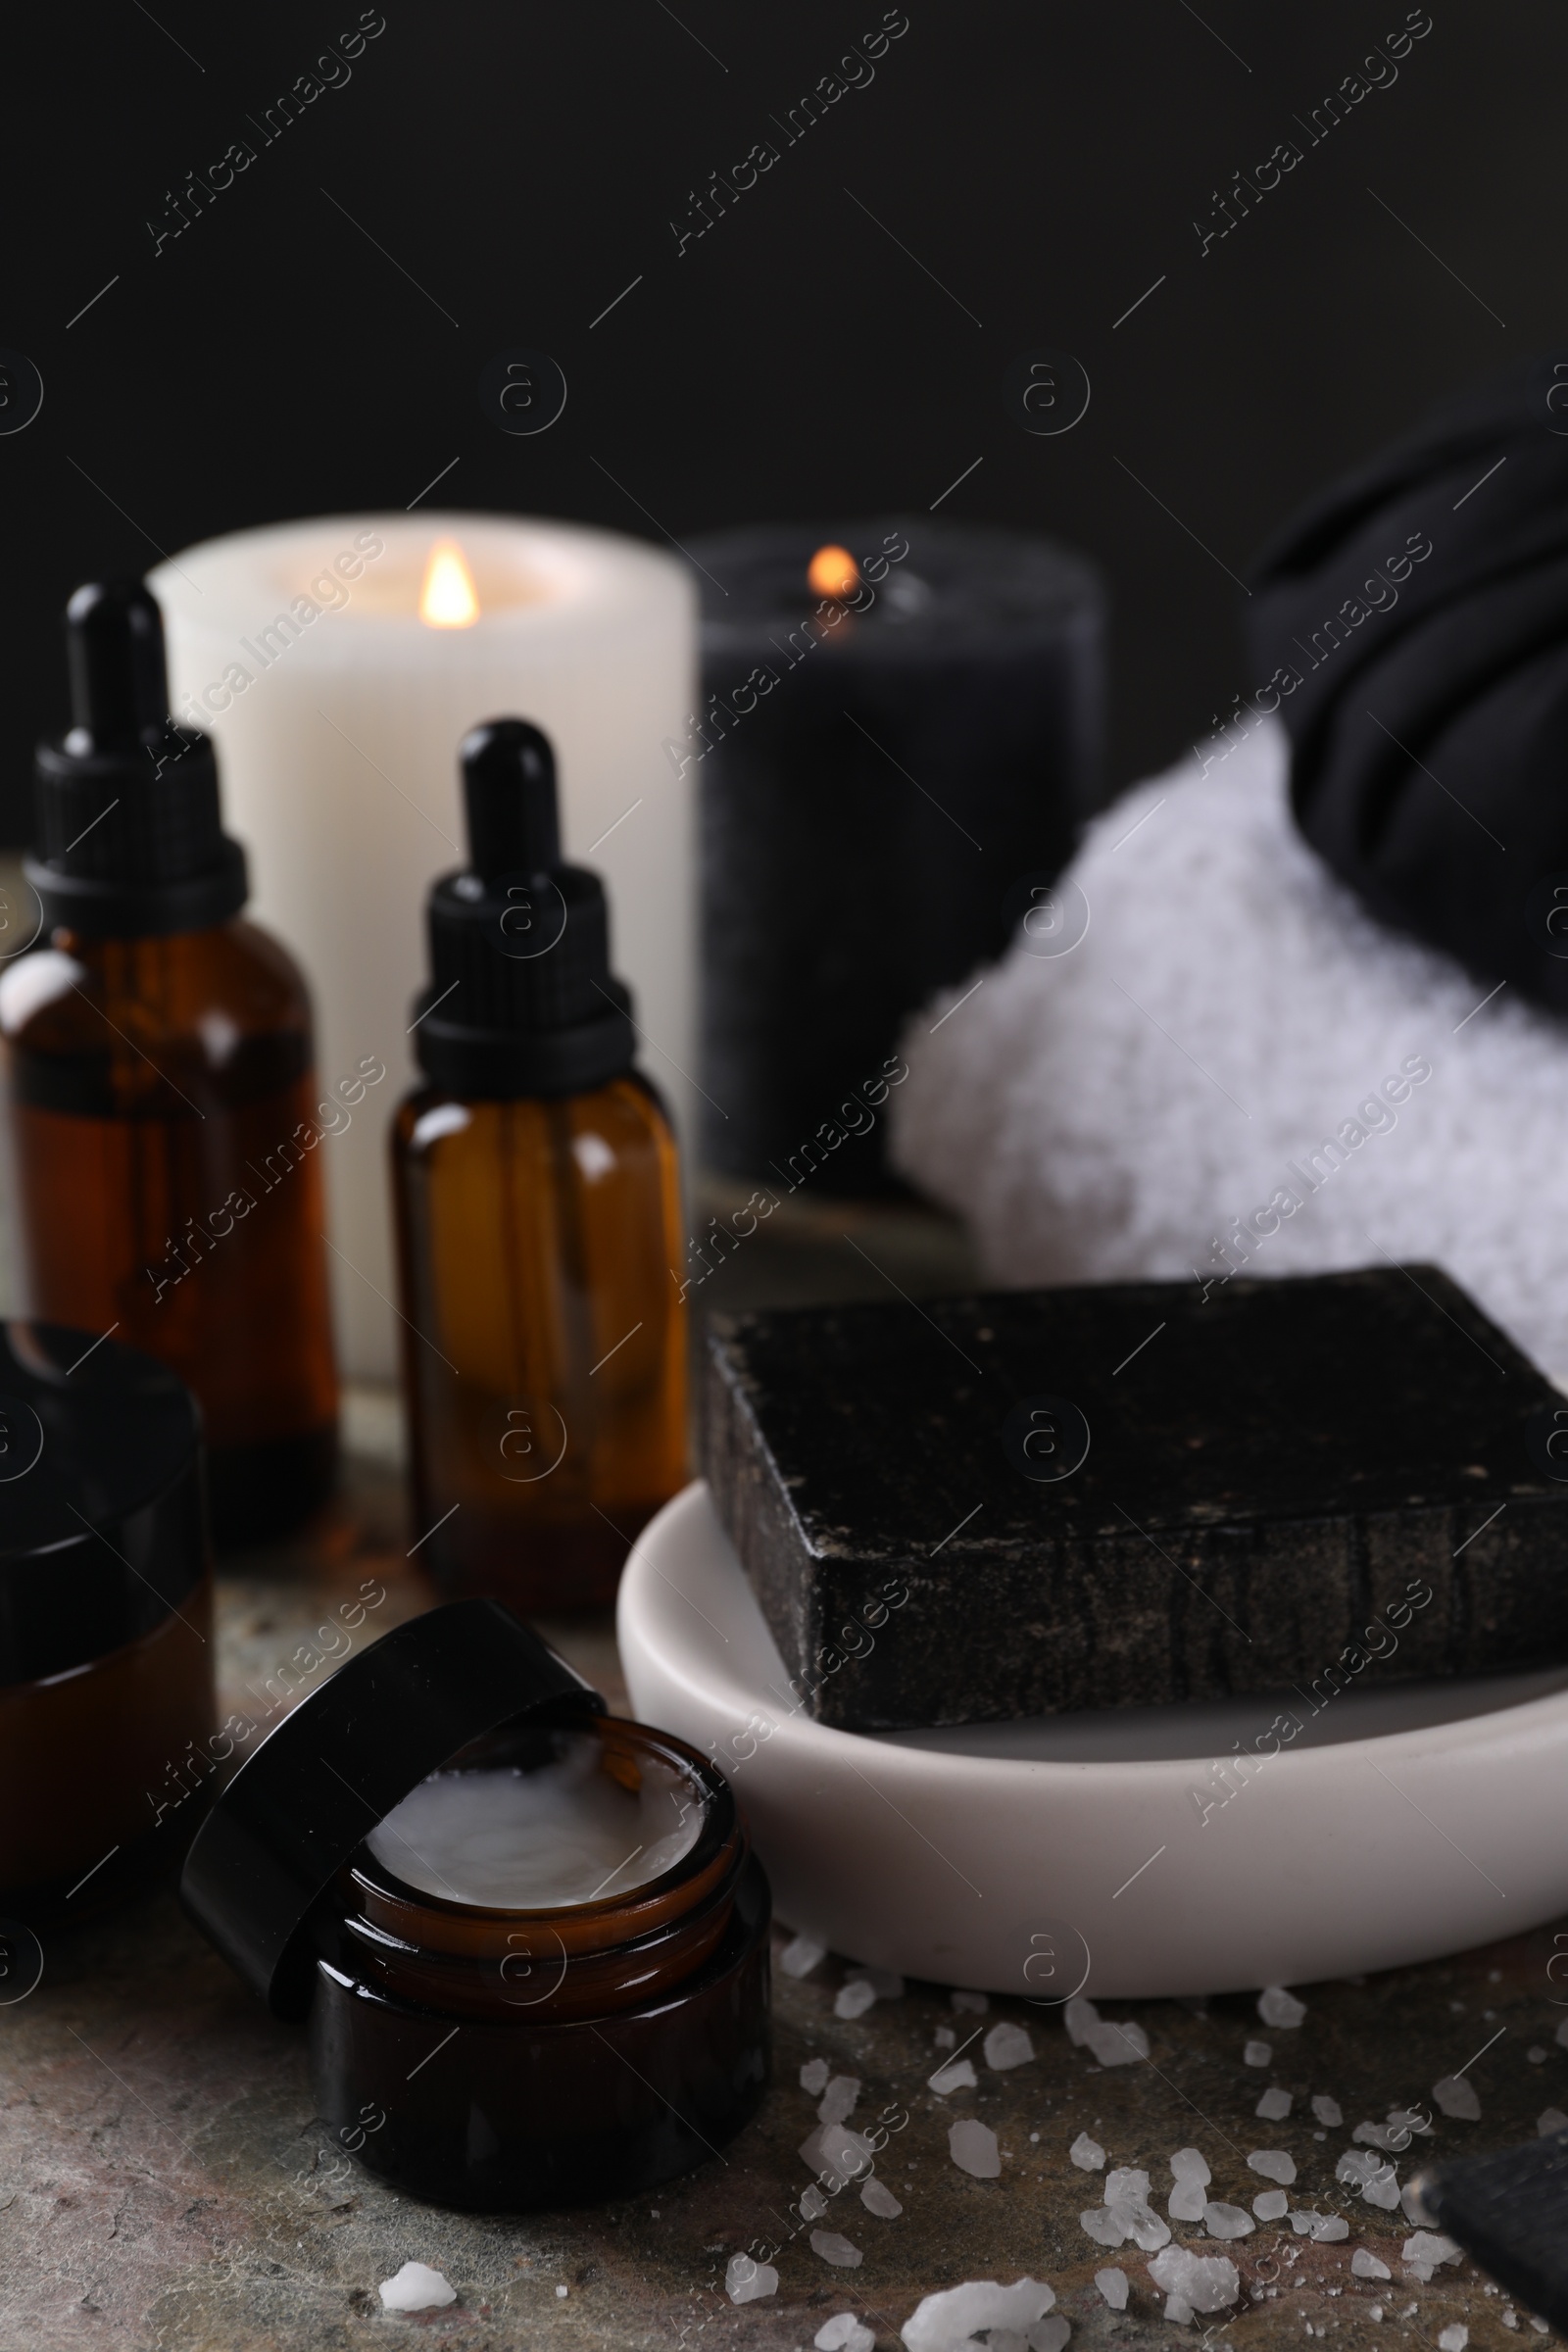 Photo of Spa composition. Black soap bar, sea salt, jar of cream and towels on table